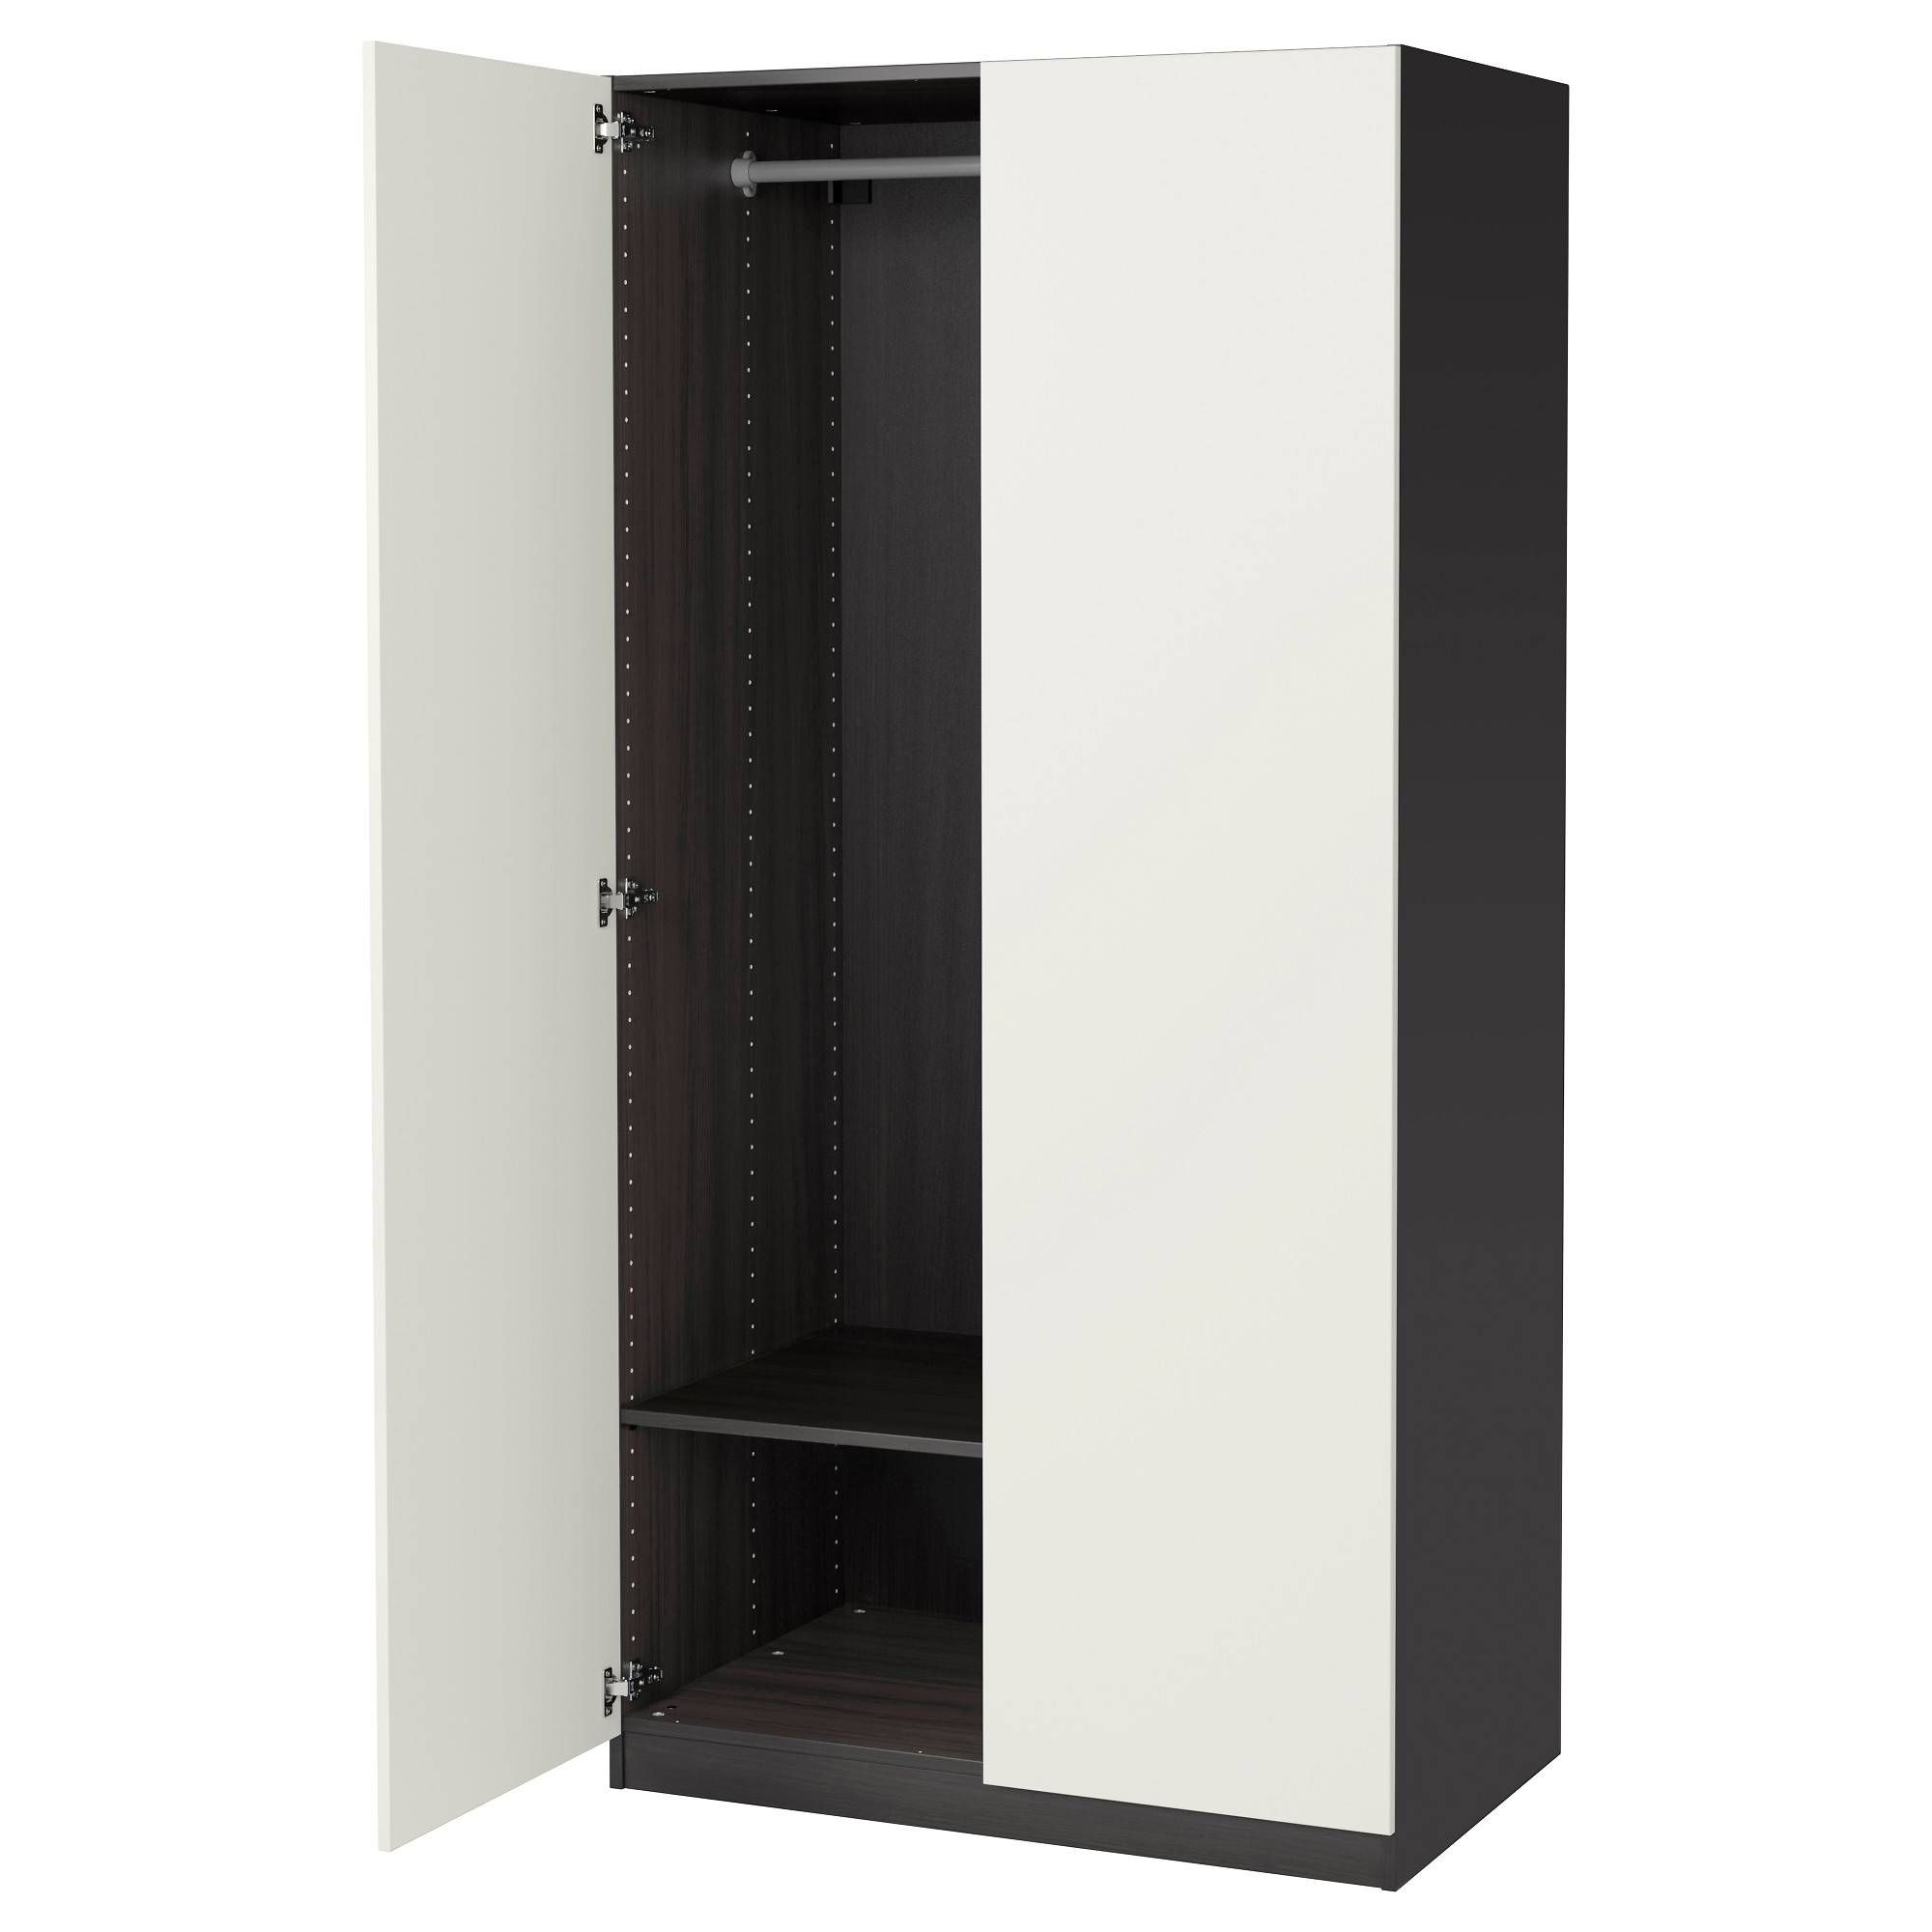 Wardrobes | Ikea Intended For Cheap 2 Door Wardrobes (View 4 of 15)